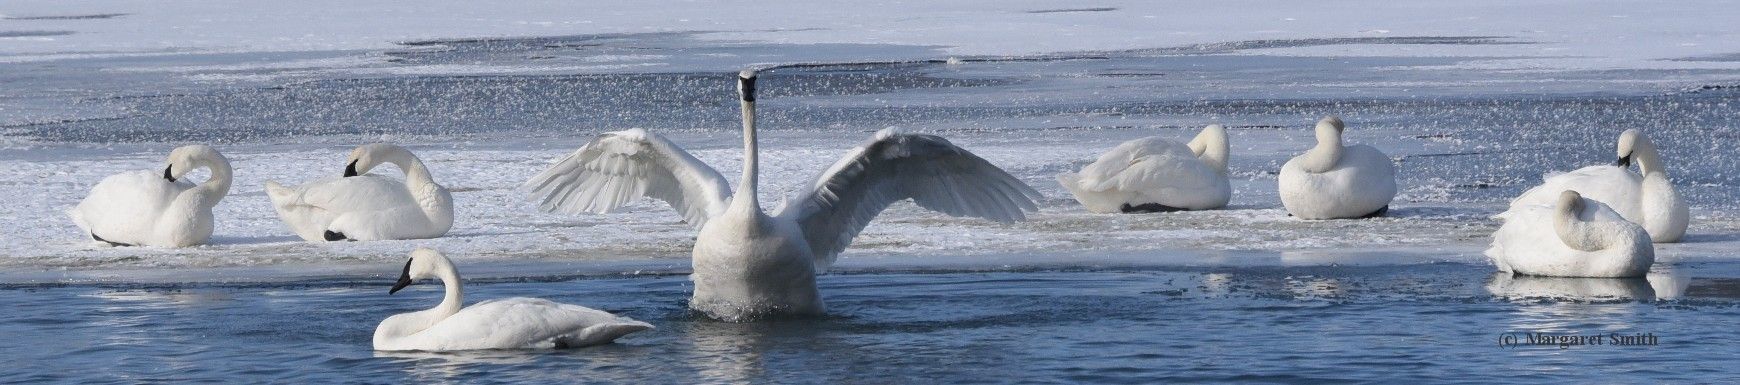 Sign up to receive the monthly Enewsletter of The Trumpeter Swan Society and you'll receive updates about swan issues, events and more! You can unsubscribe any time.